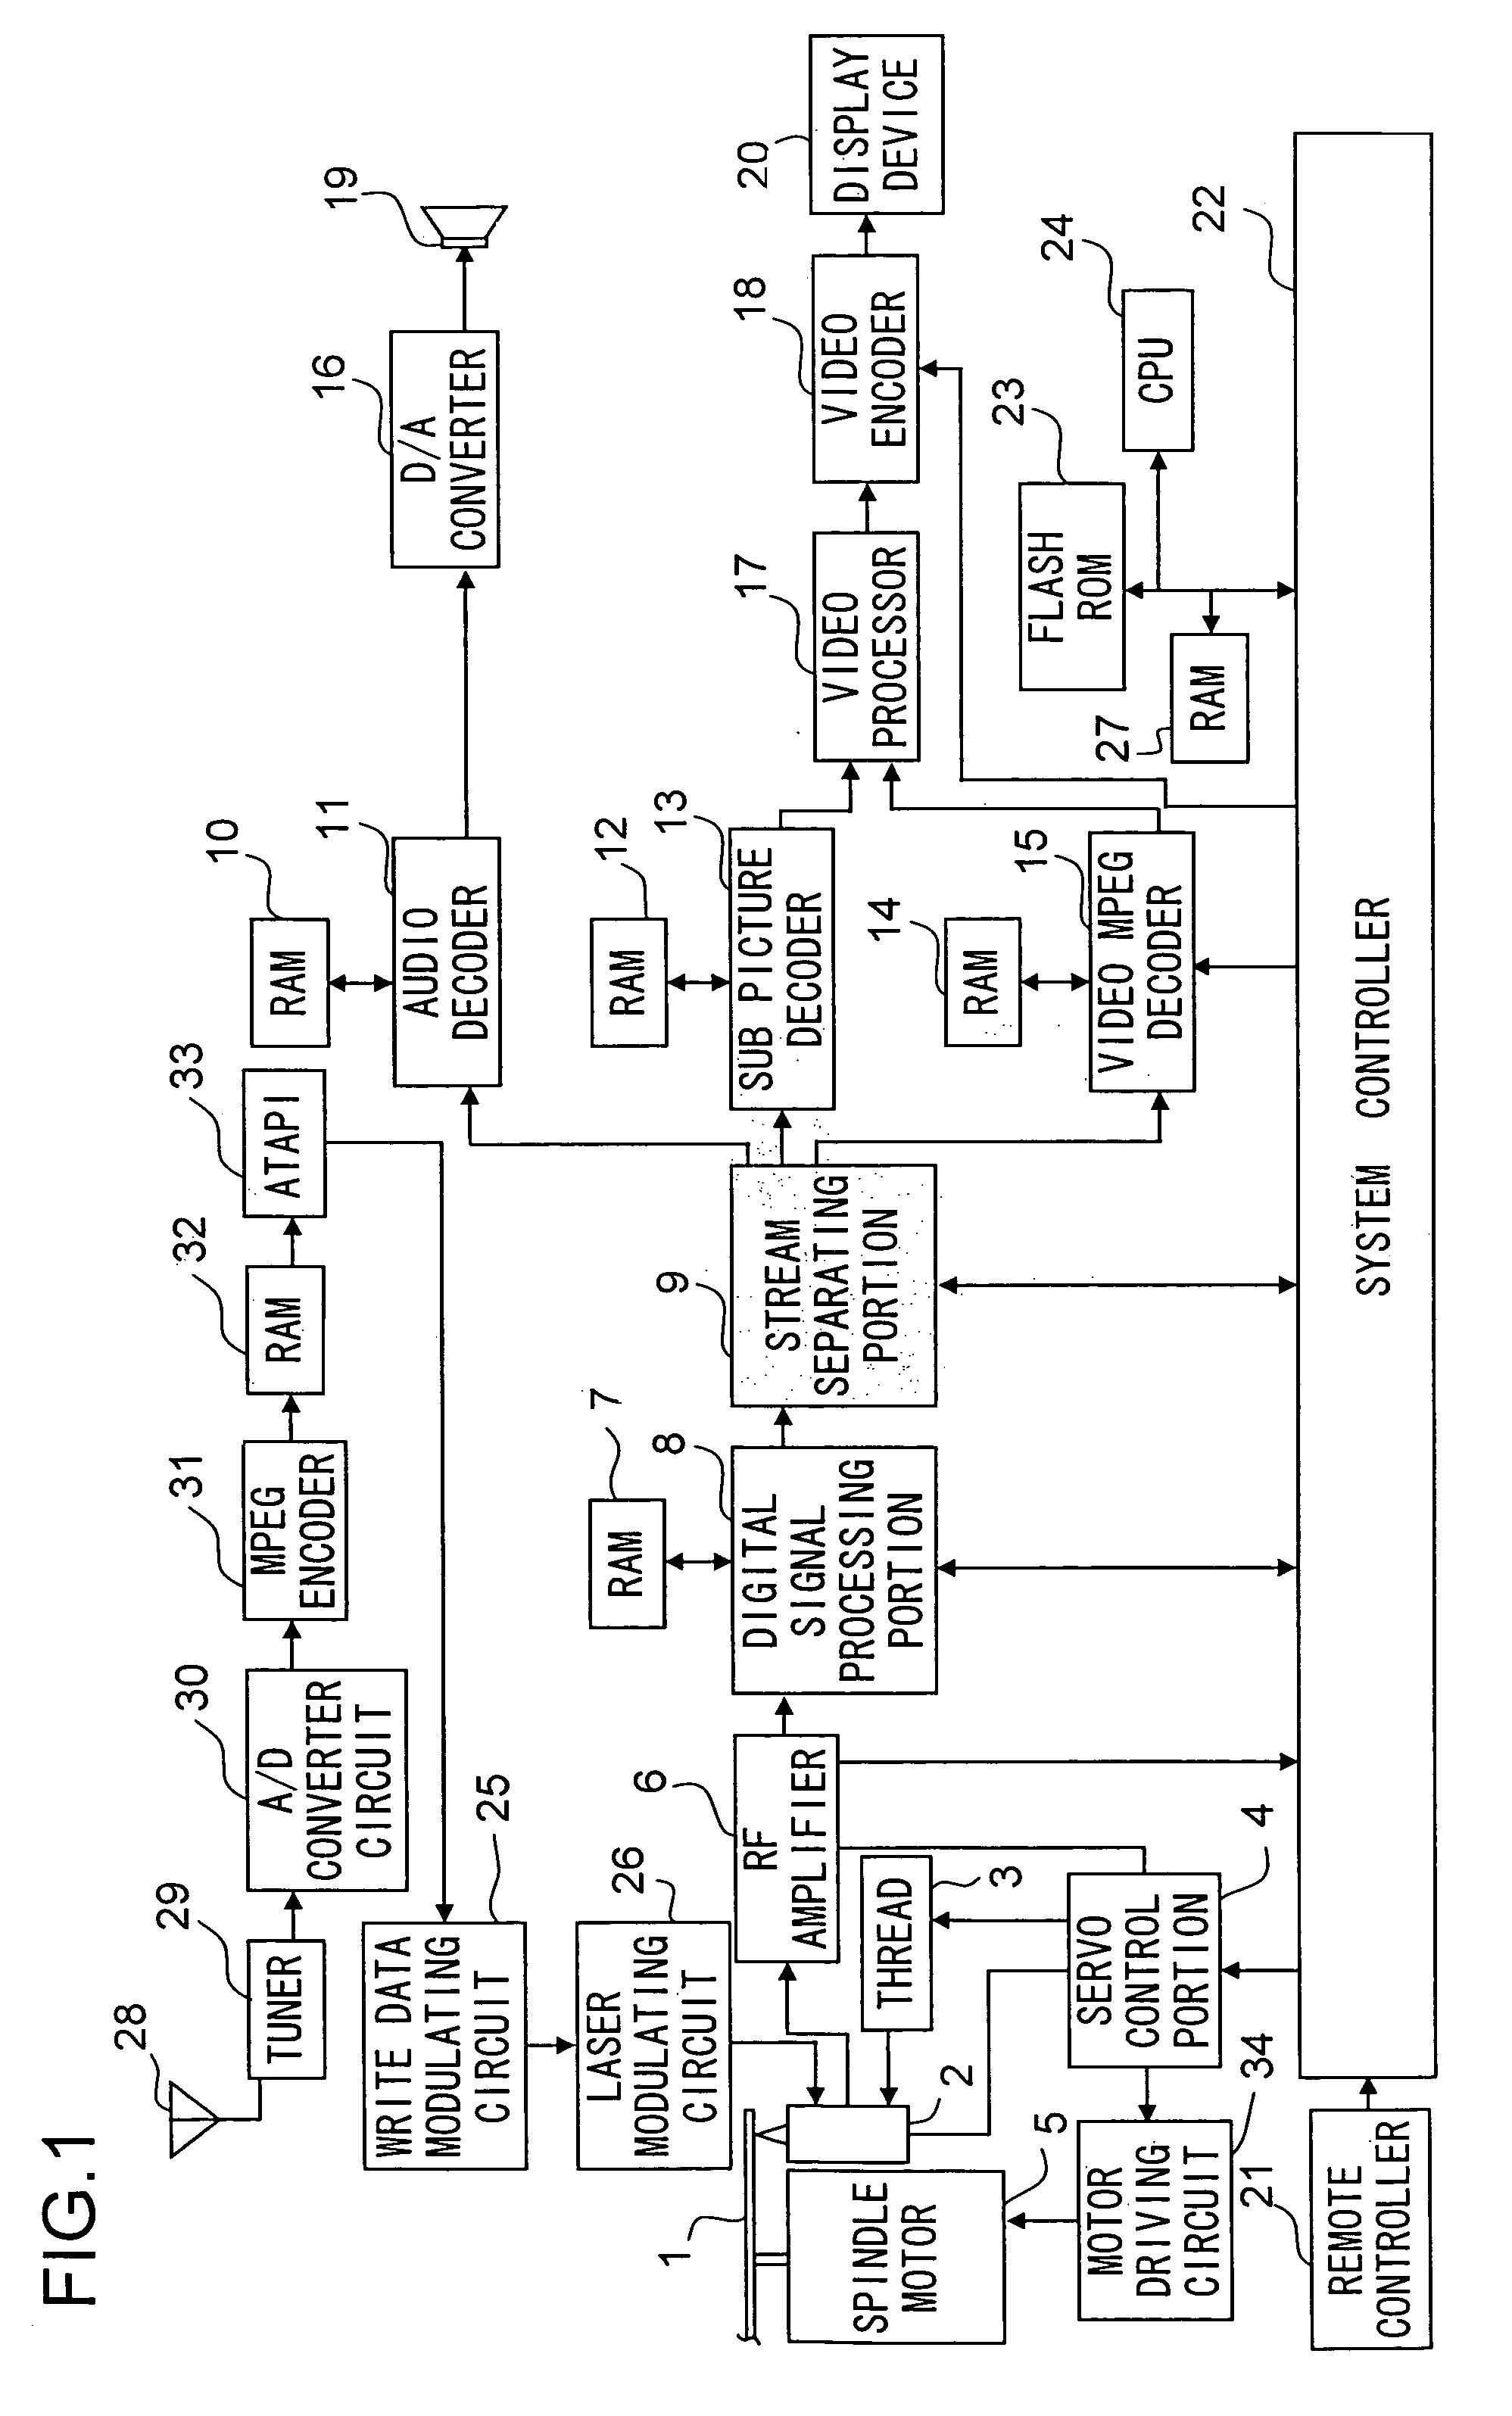 Optical disk recording and reproducing device